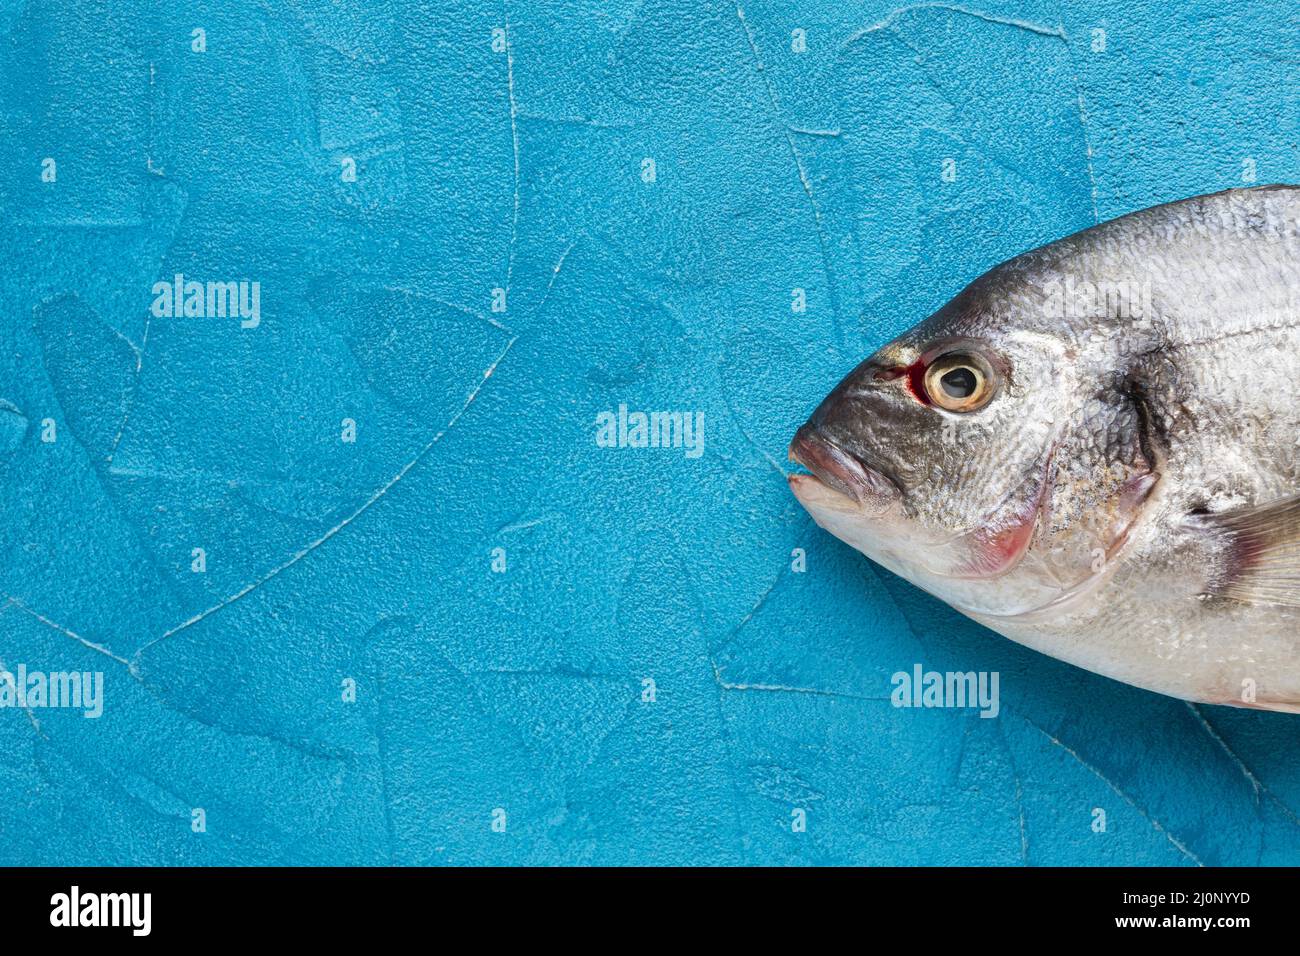 Top view fish blue background. High quality and resolution beautiful photo concept Stock Photo